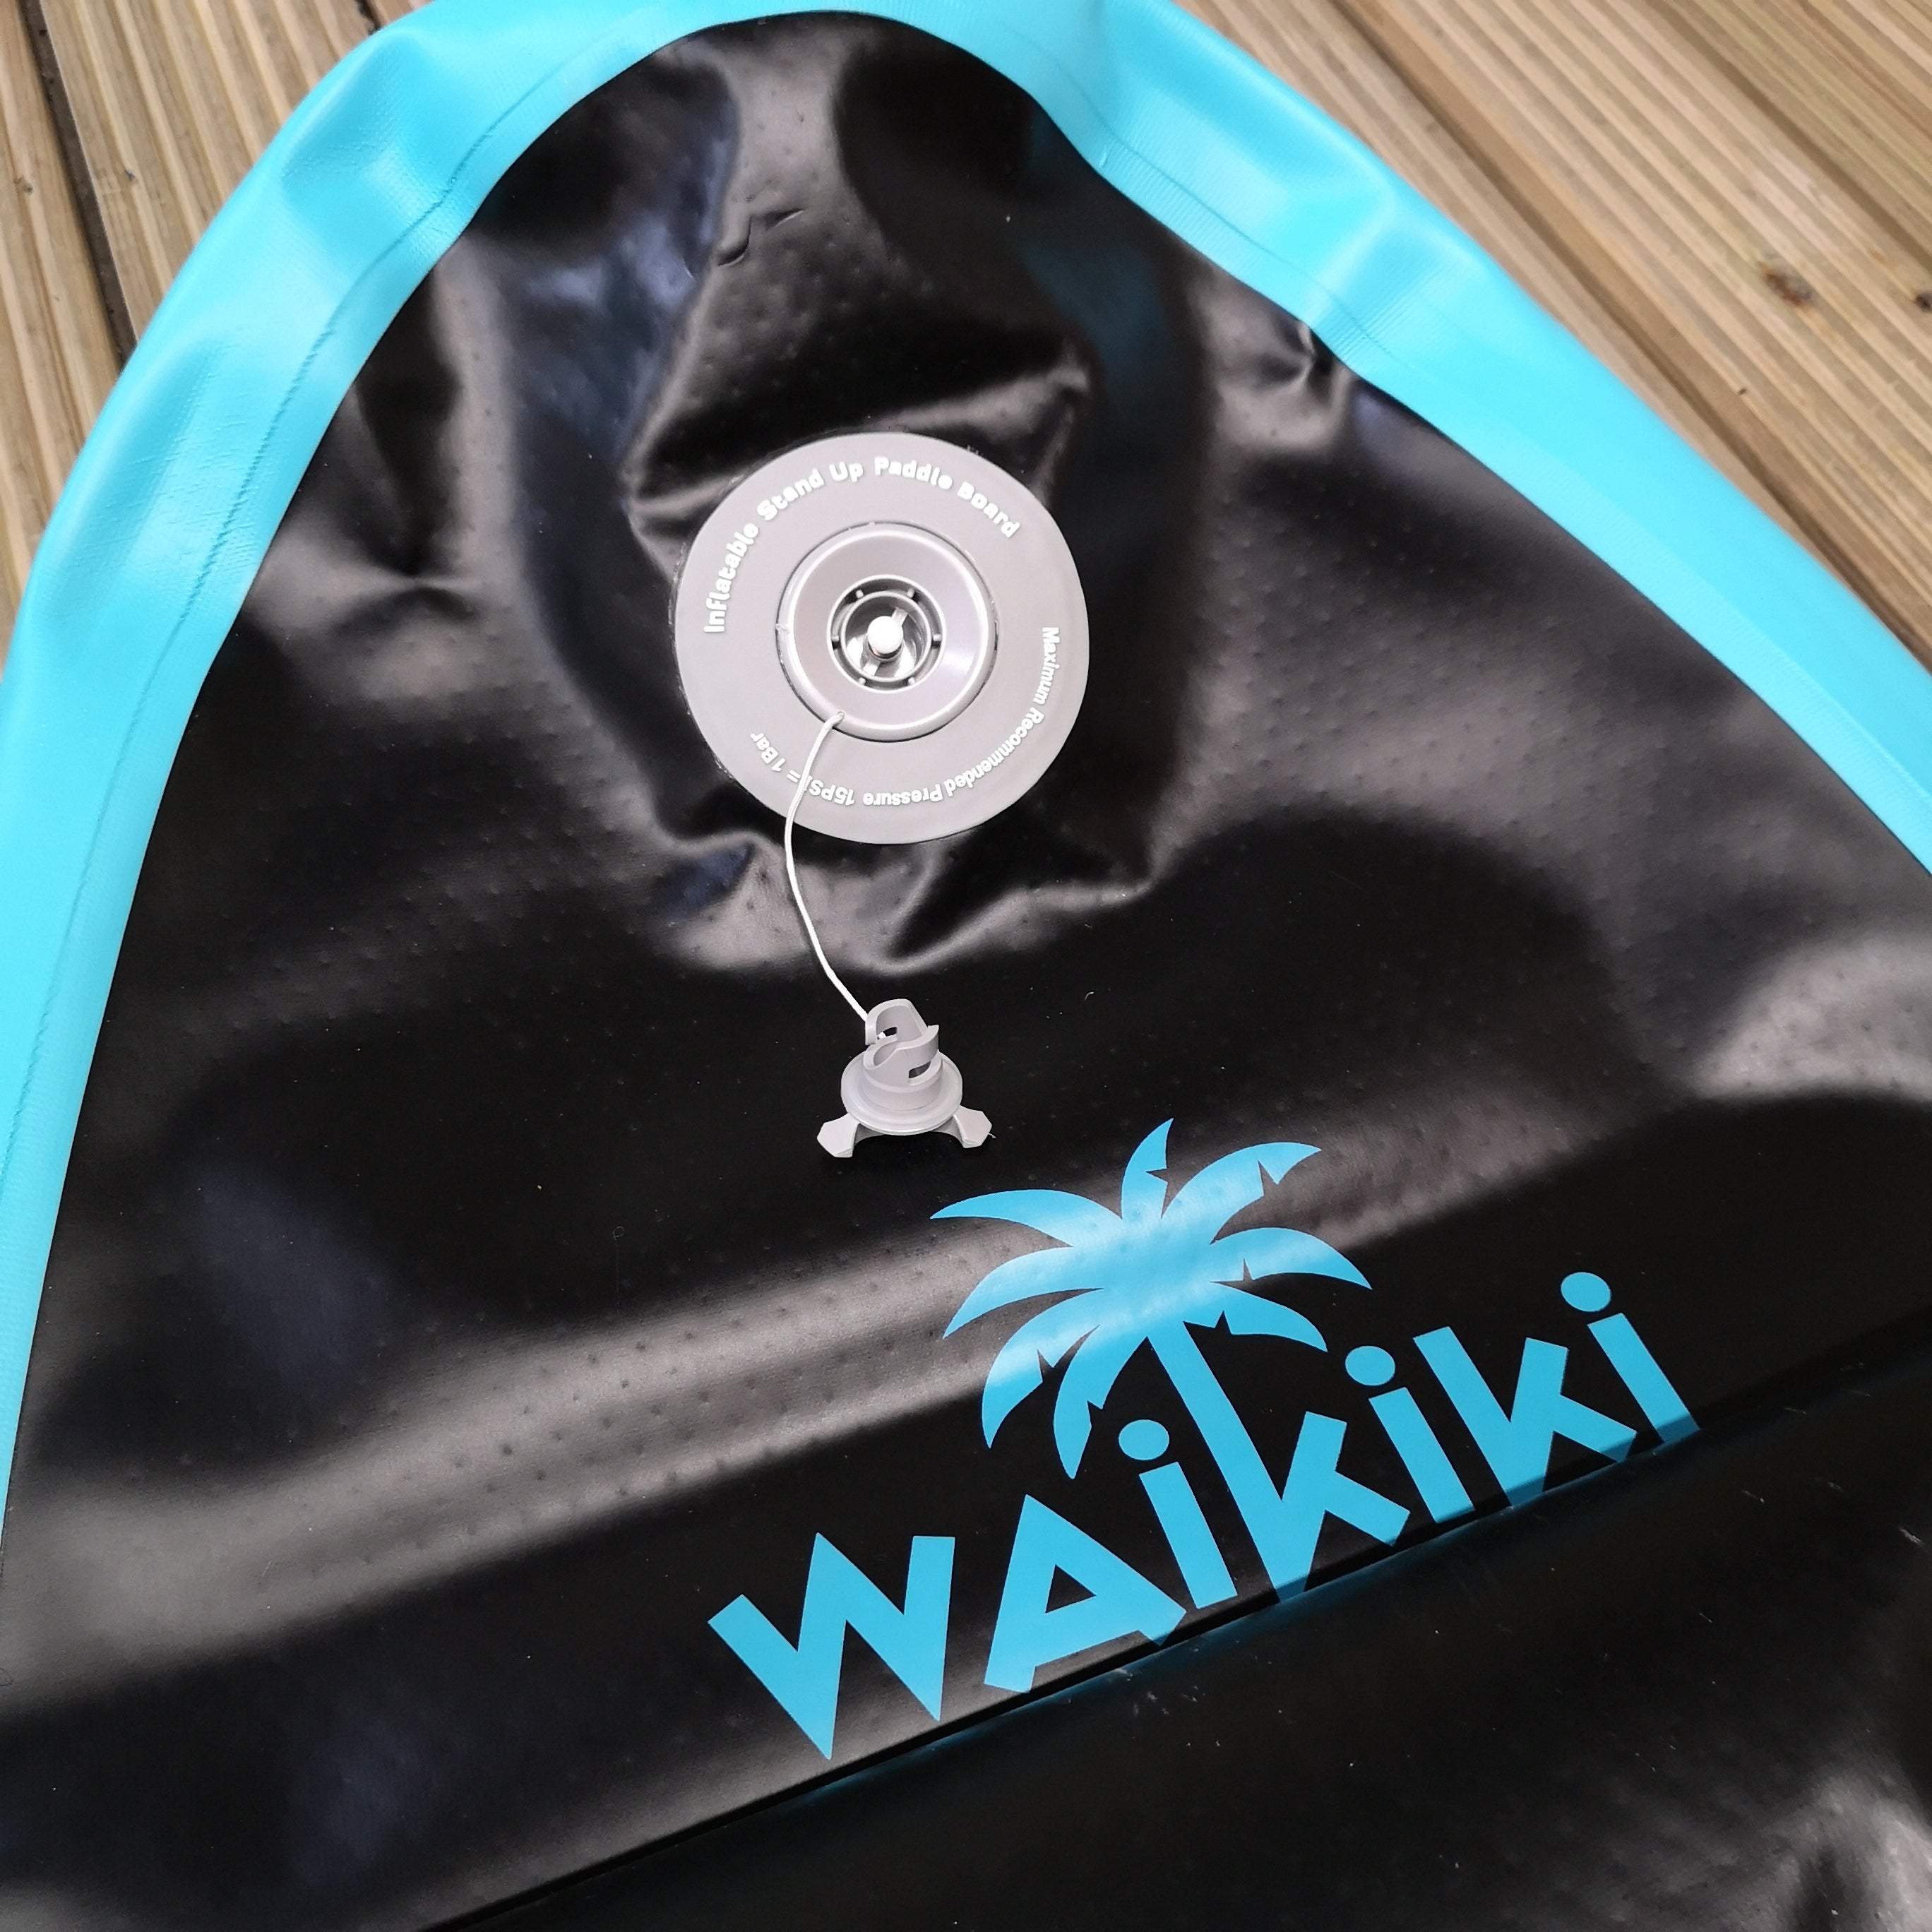 285mm Stand Up Black 'Waikiki' Inflatable Stand Up Paddle Board & Kit